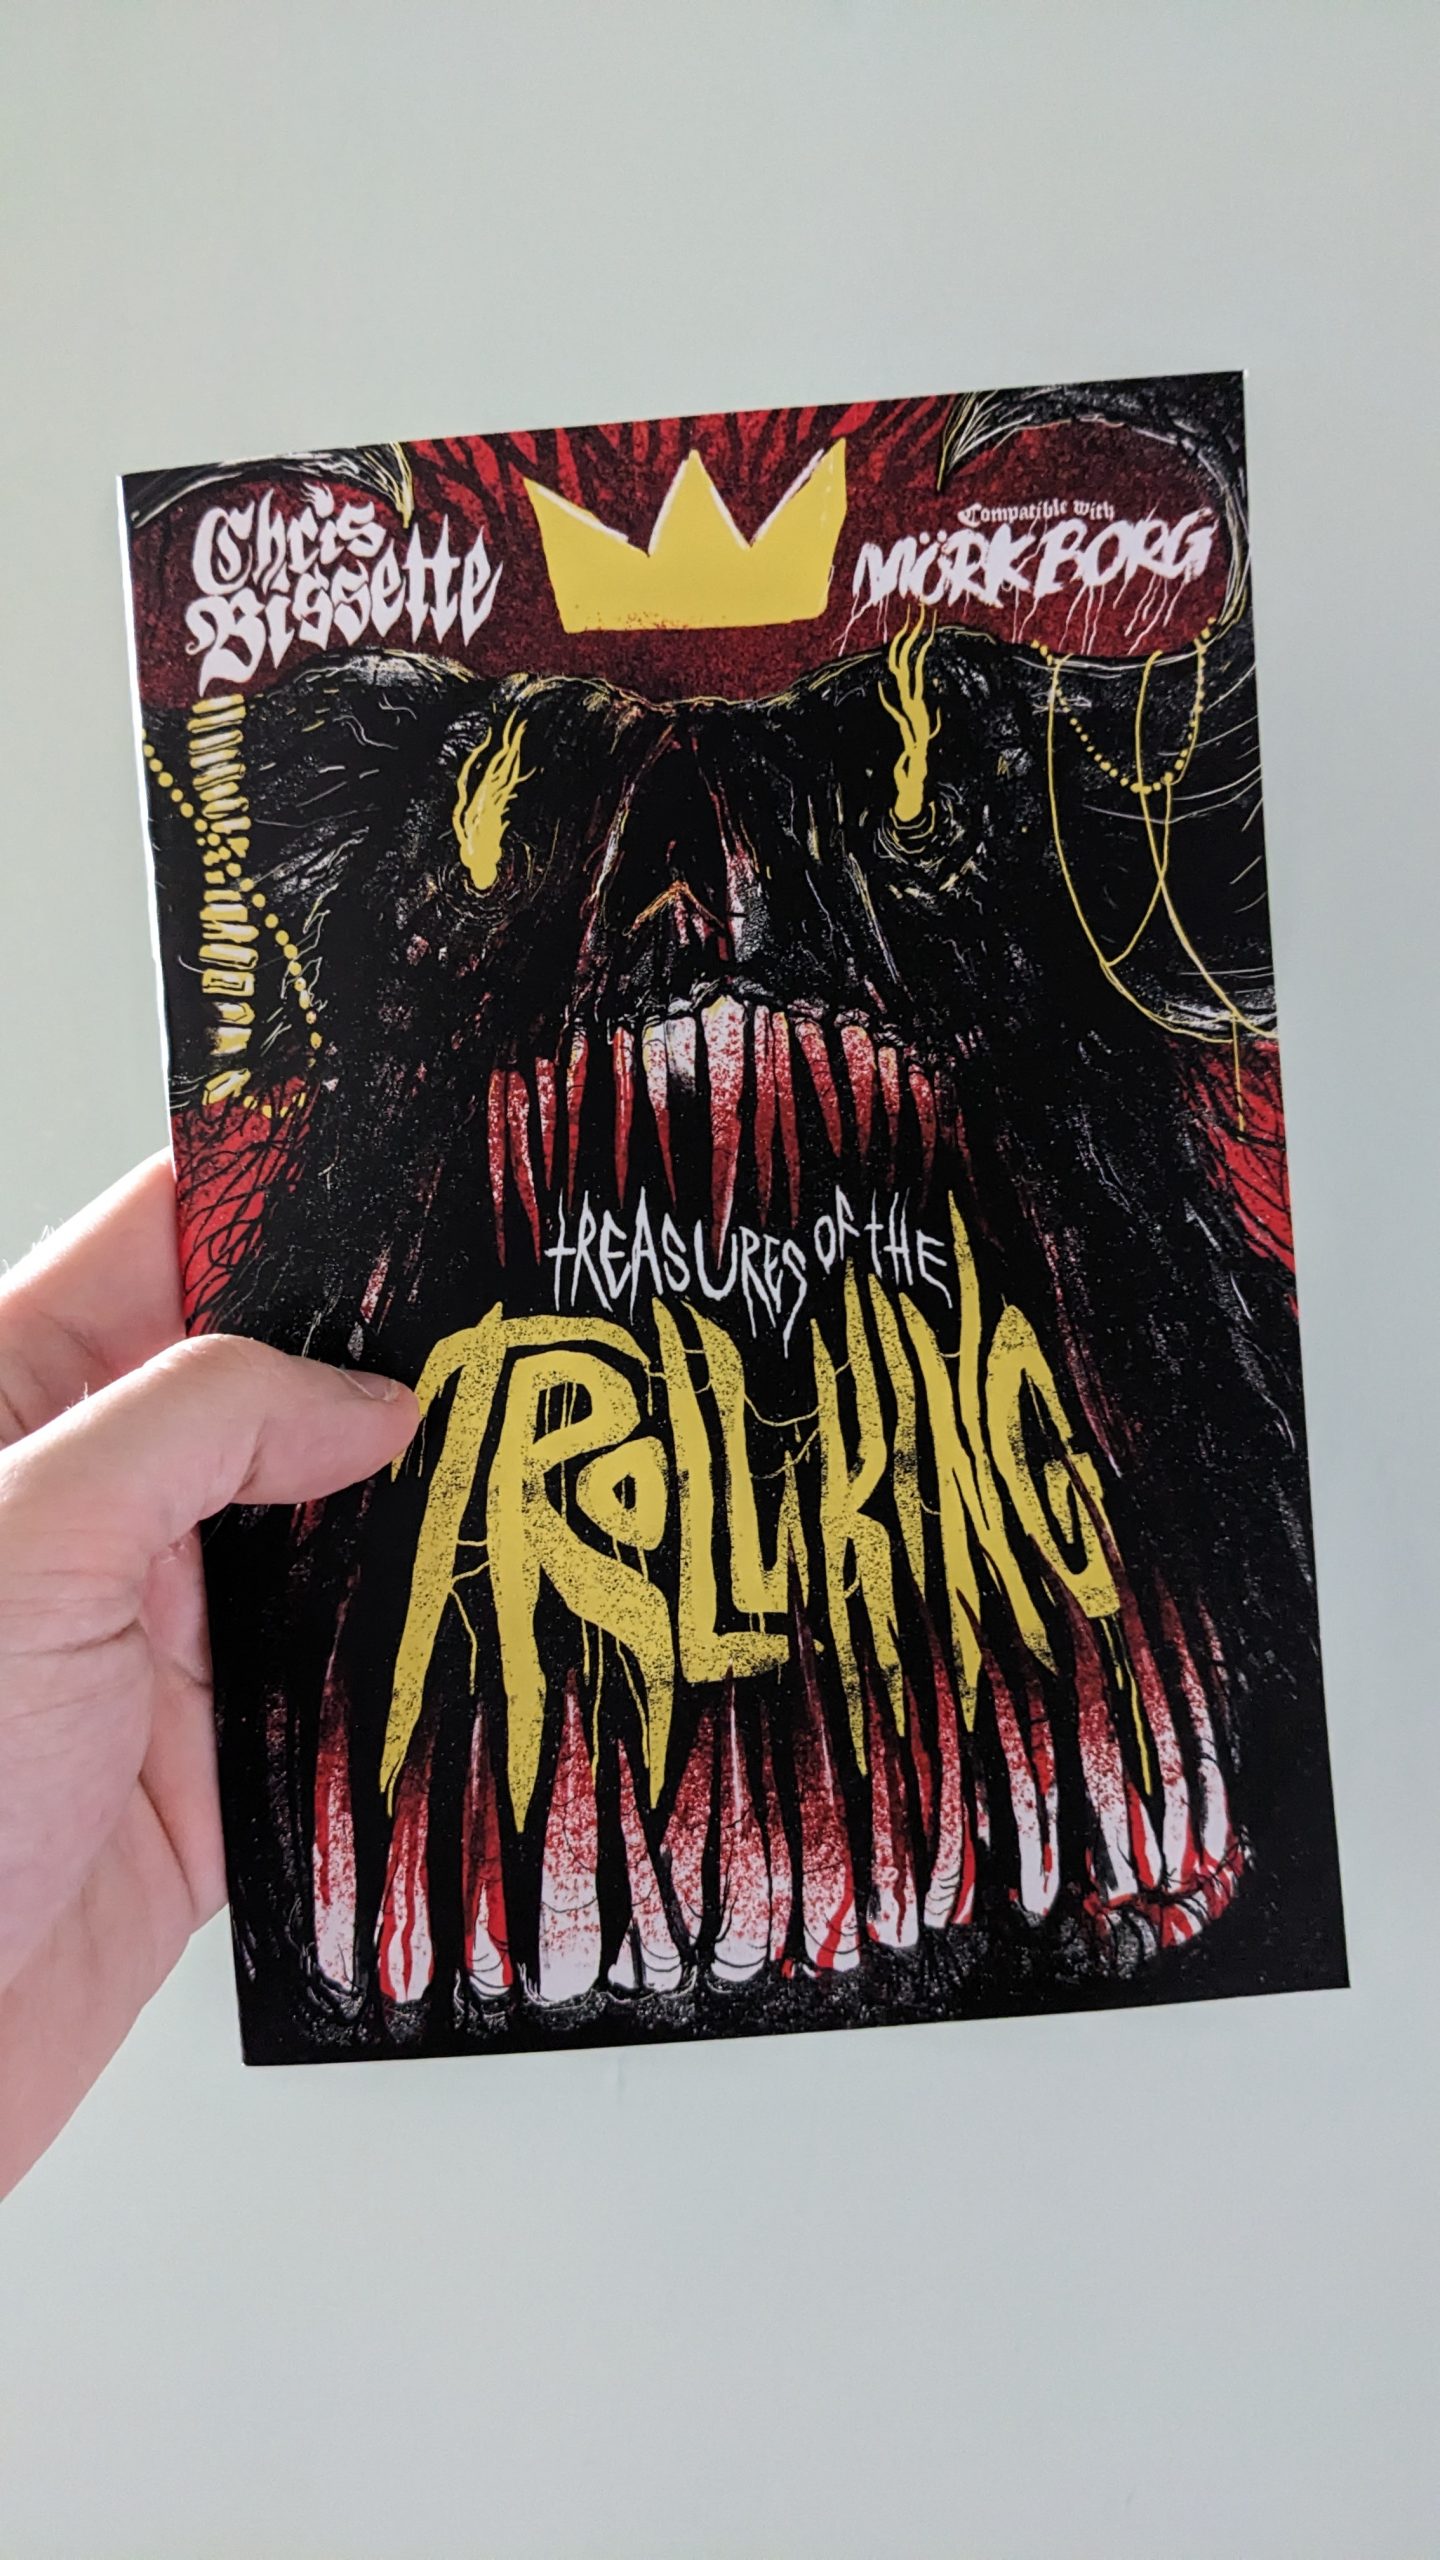 An A5 zine held against a plain white background. The cover shows a dark dreature with an abundance of teeth, dripping in blood. In the space between the teeth yellow text reads "Treasures Of The Troll King". The creature wears a yellow crown.